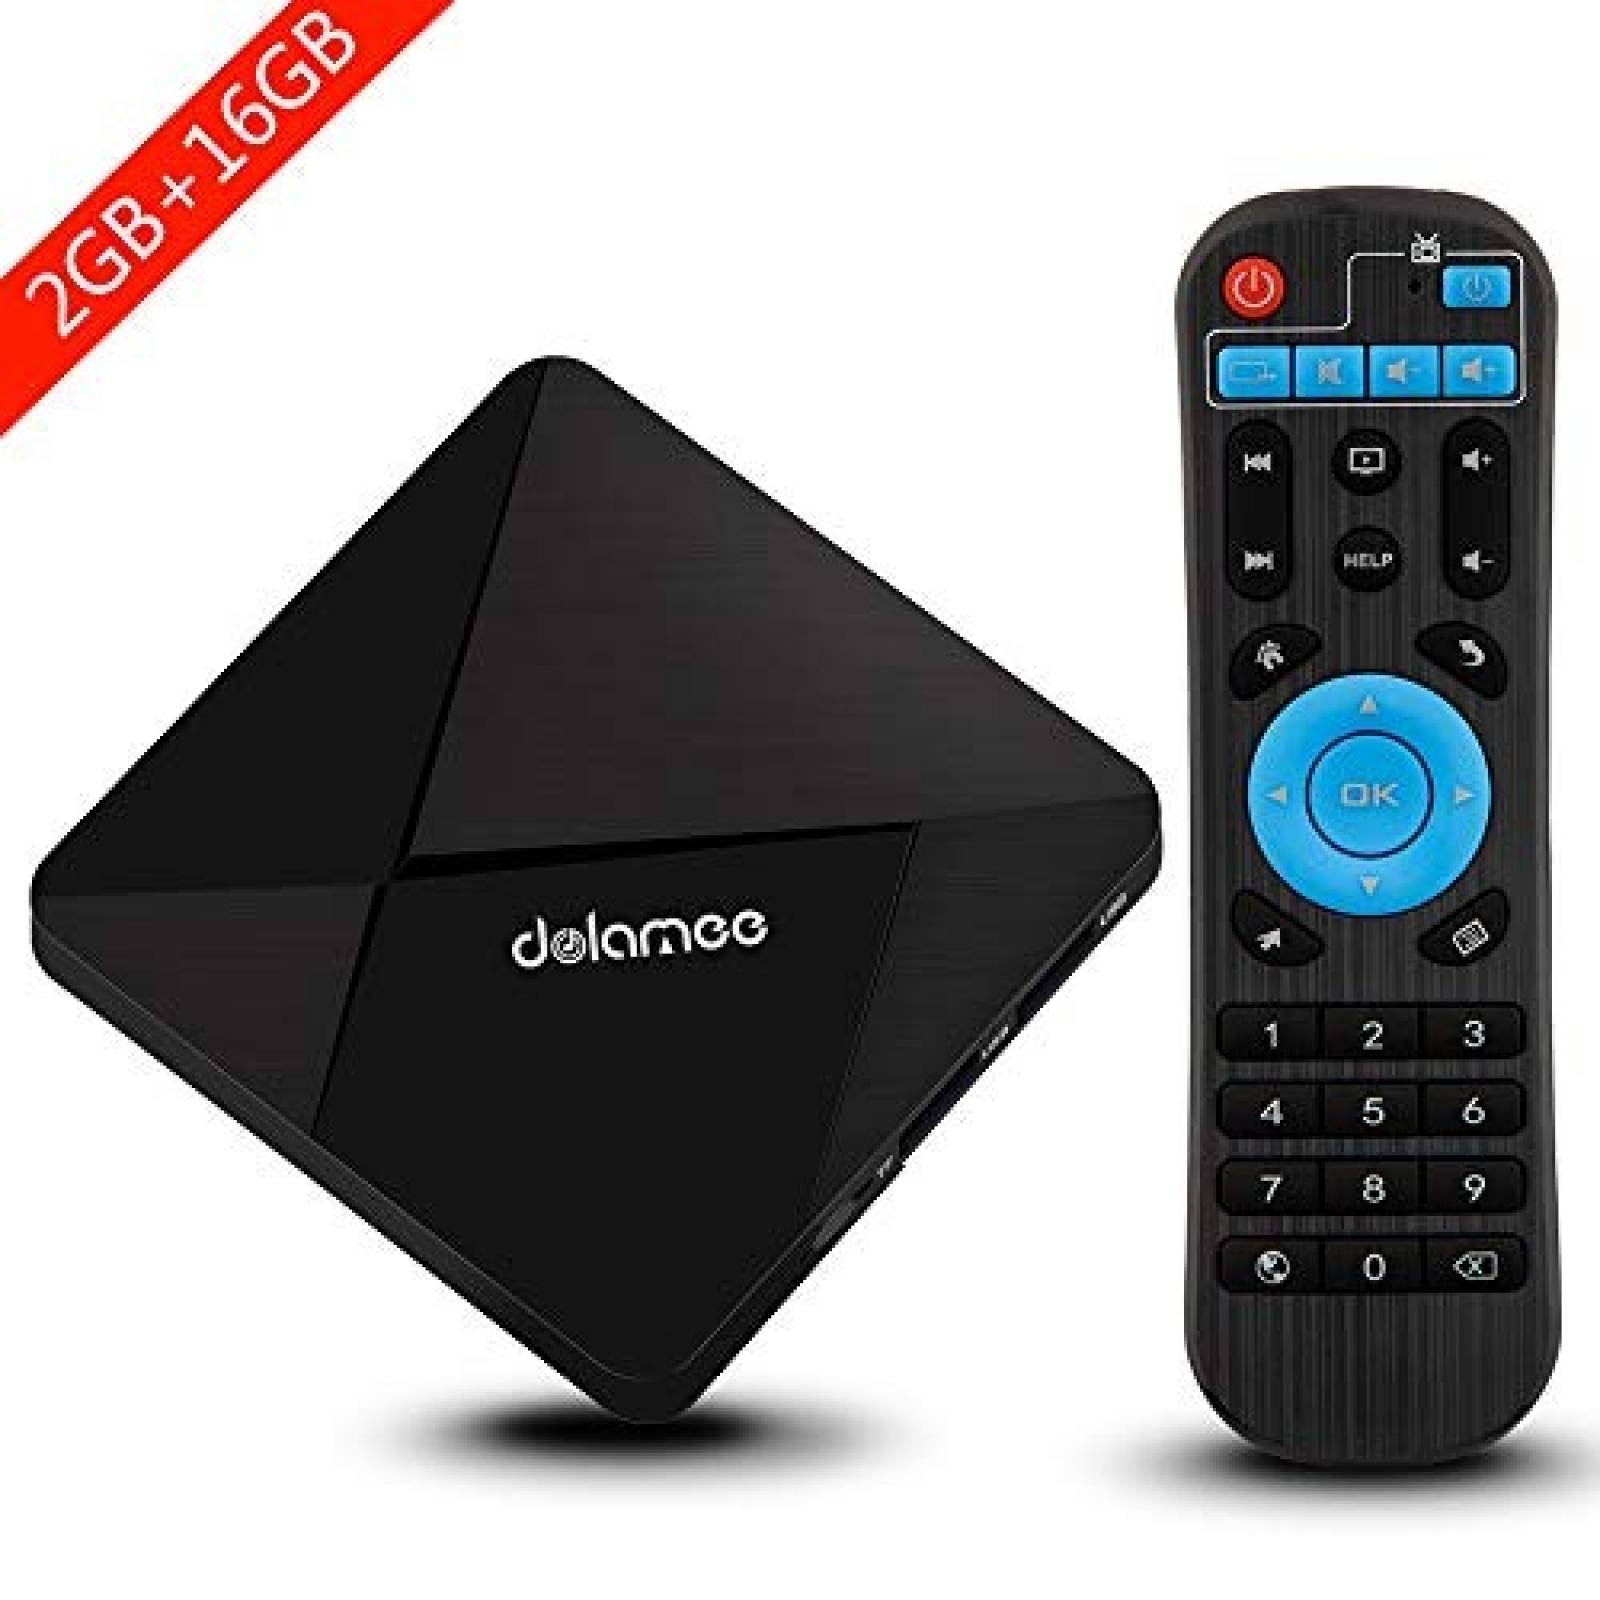 Android TV Box DOLAMEE S905 7.1 2GB 16GB Bluetooth -Negro